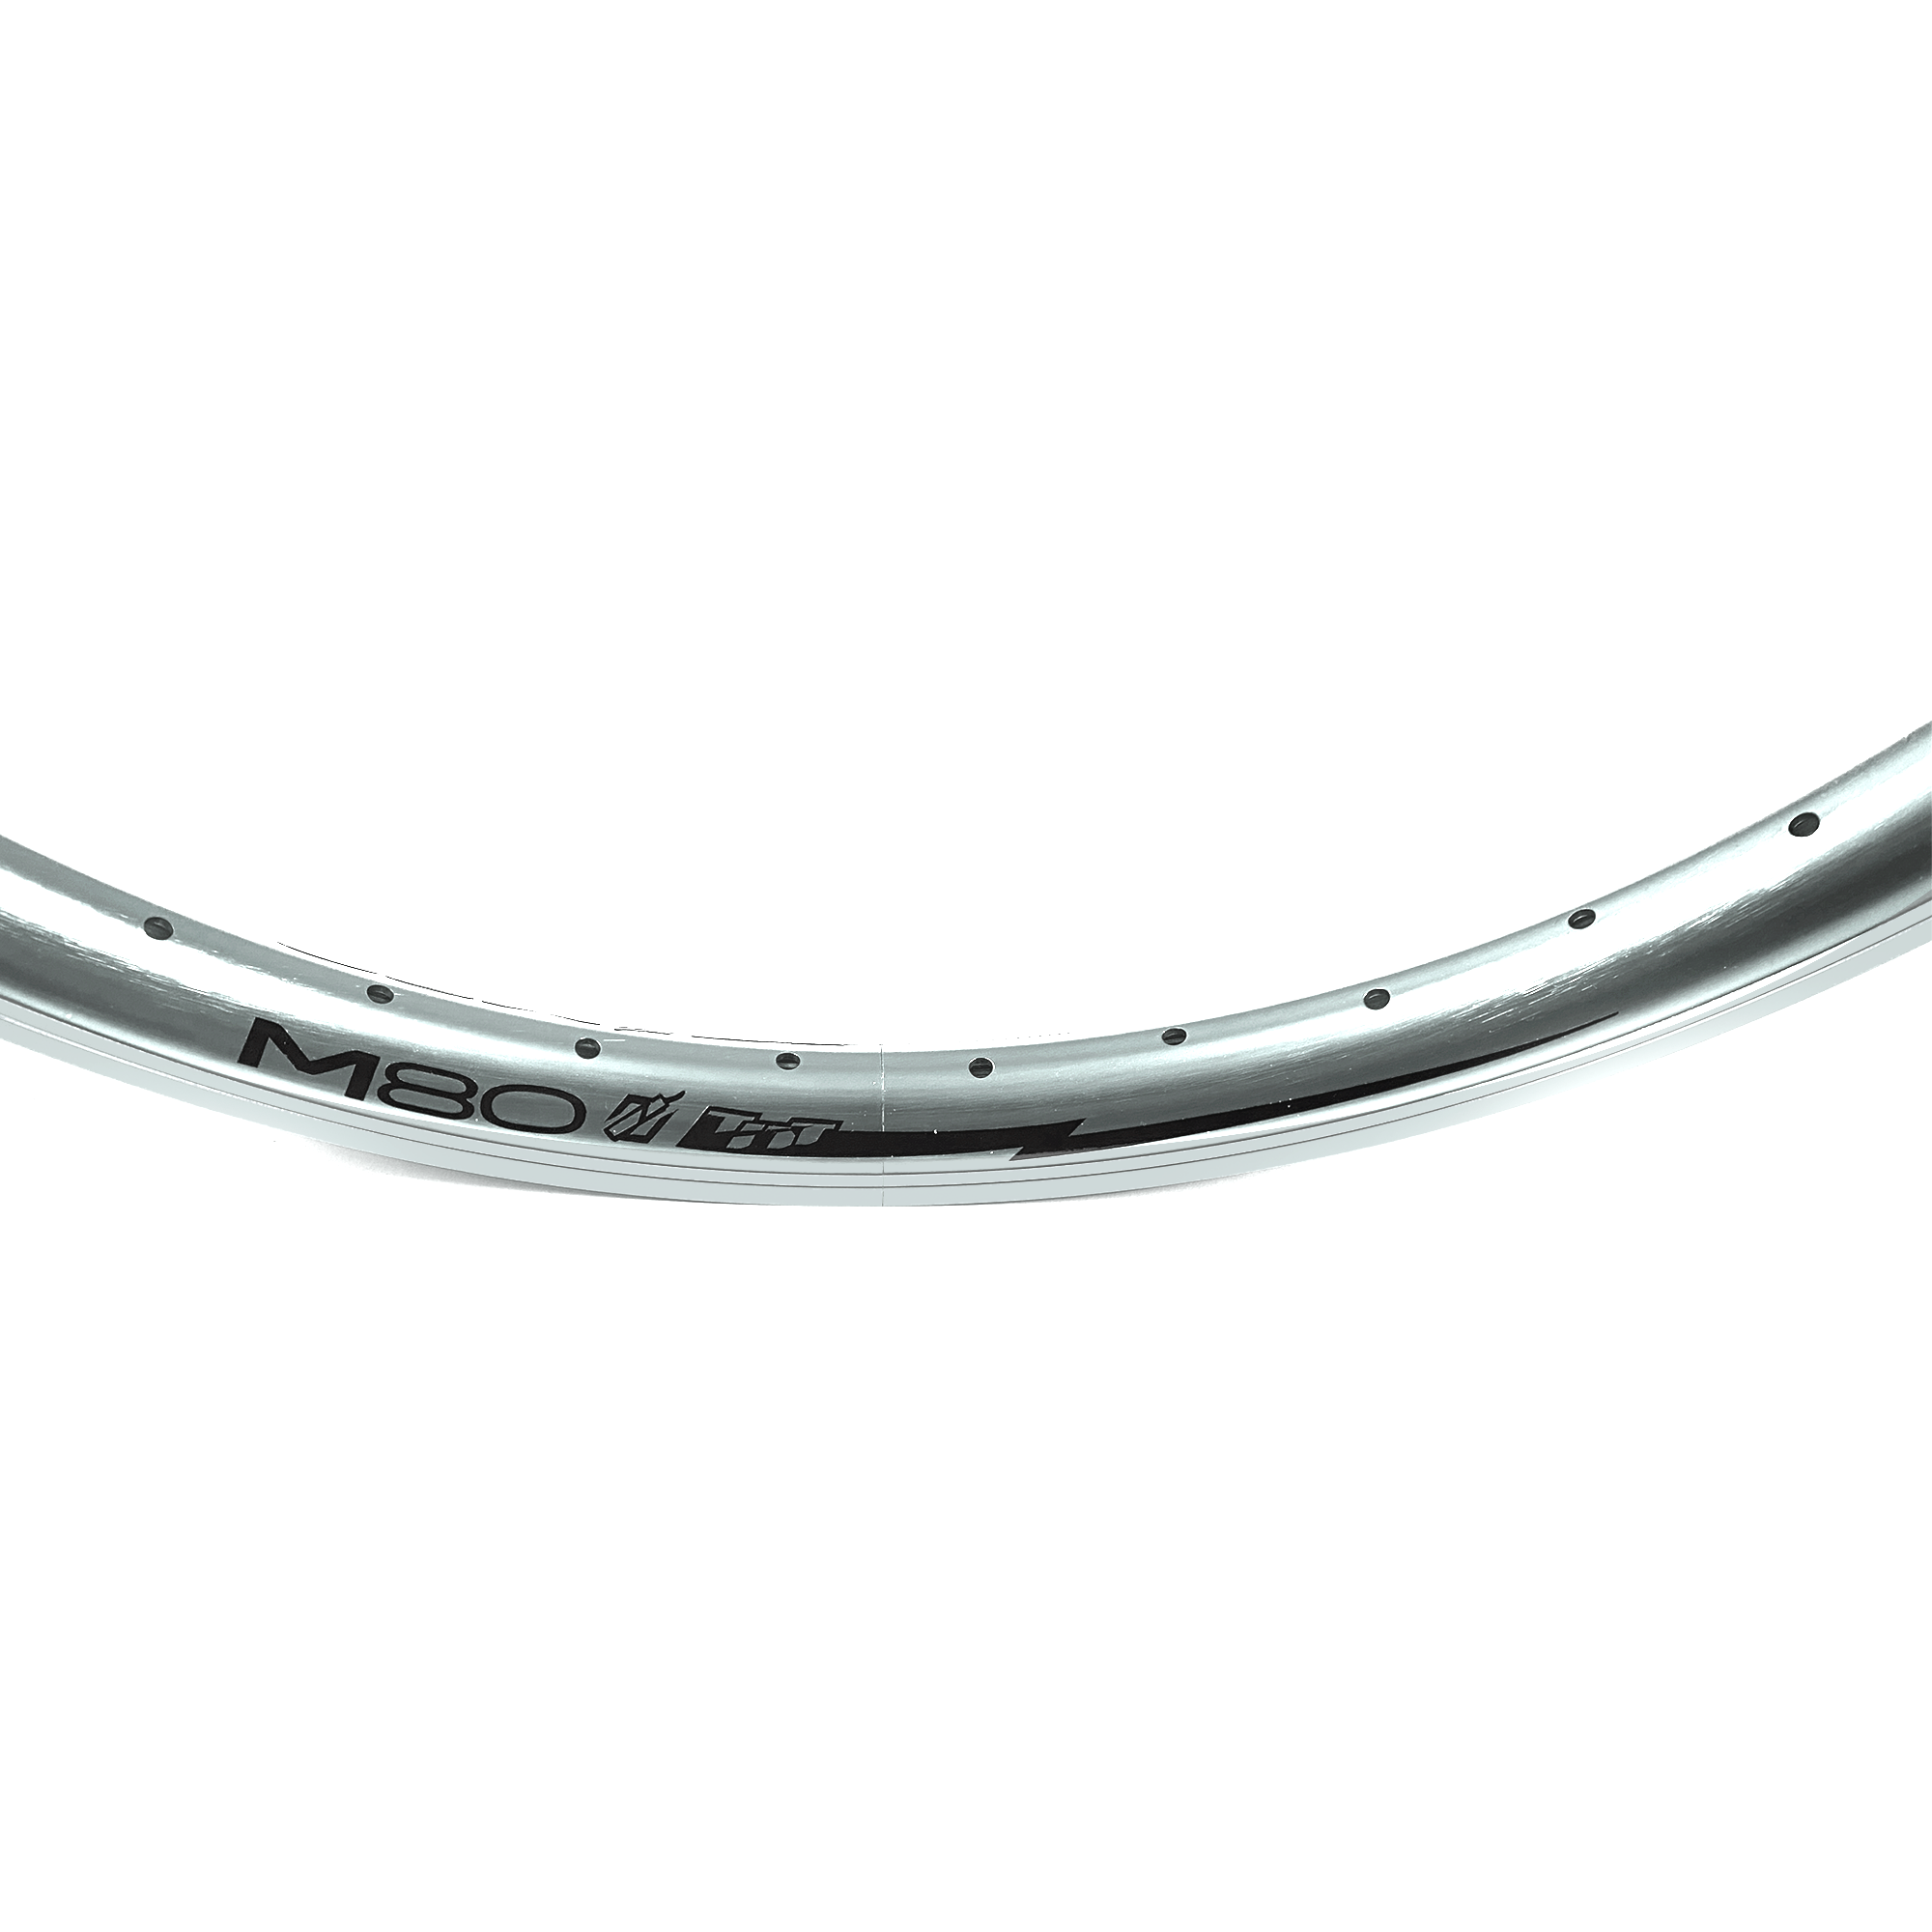 24" (507mm) TNT M80X Double Wall Rim - 28H - Silver Anodized